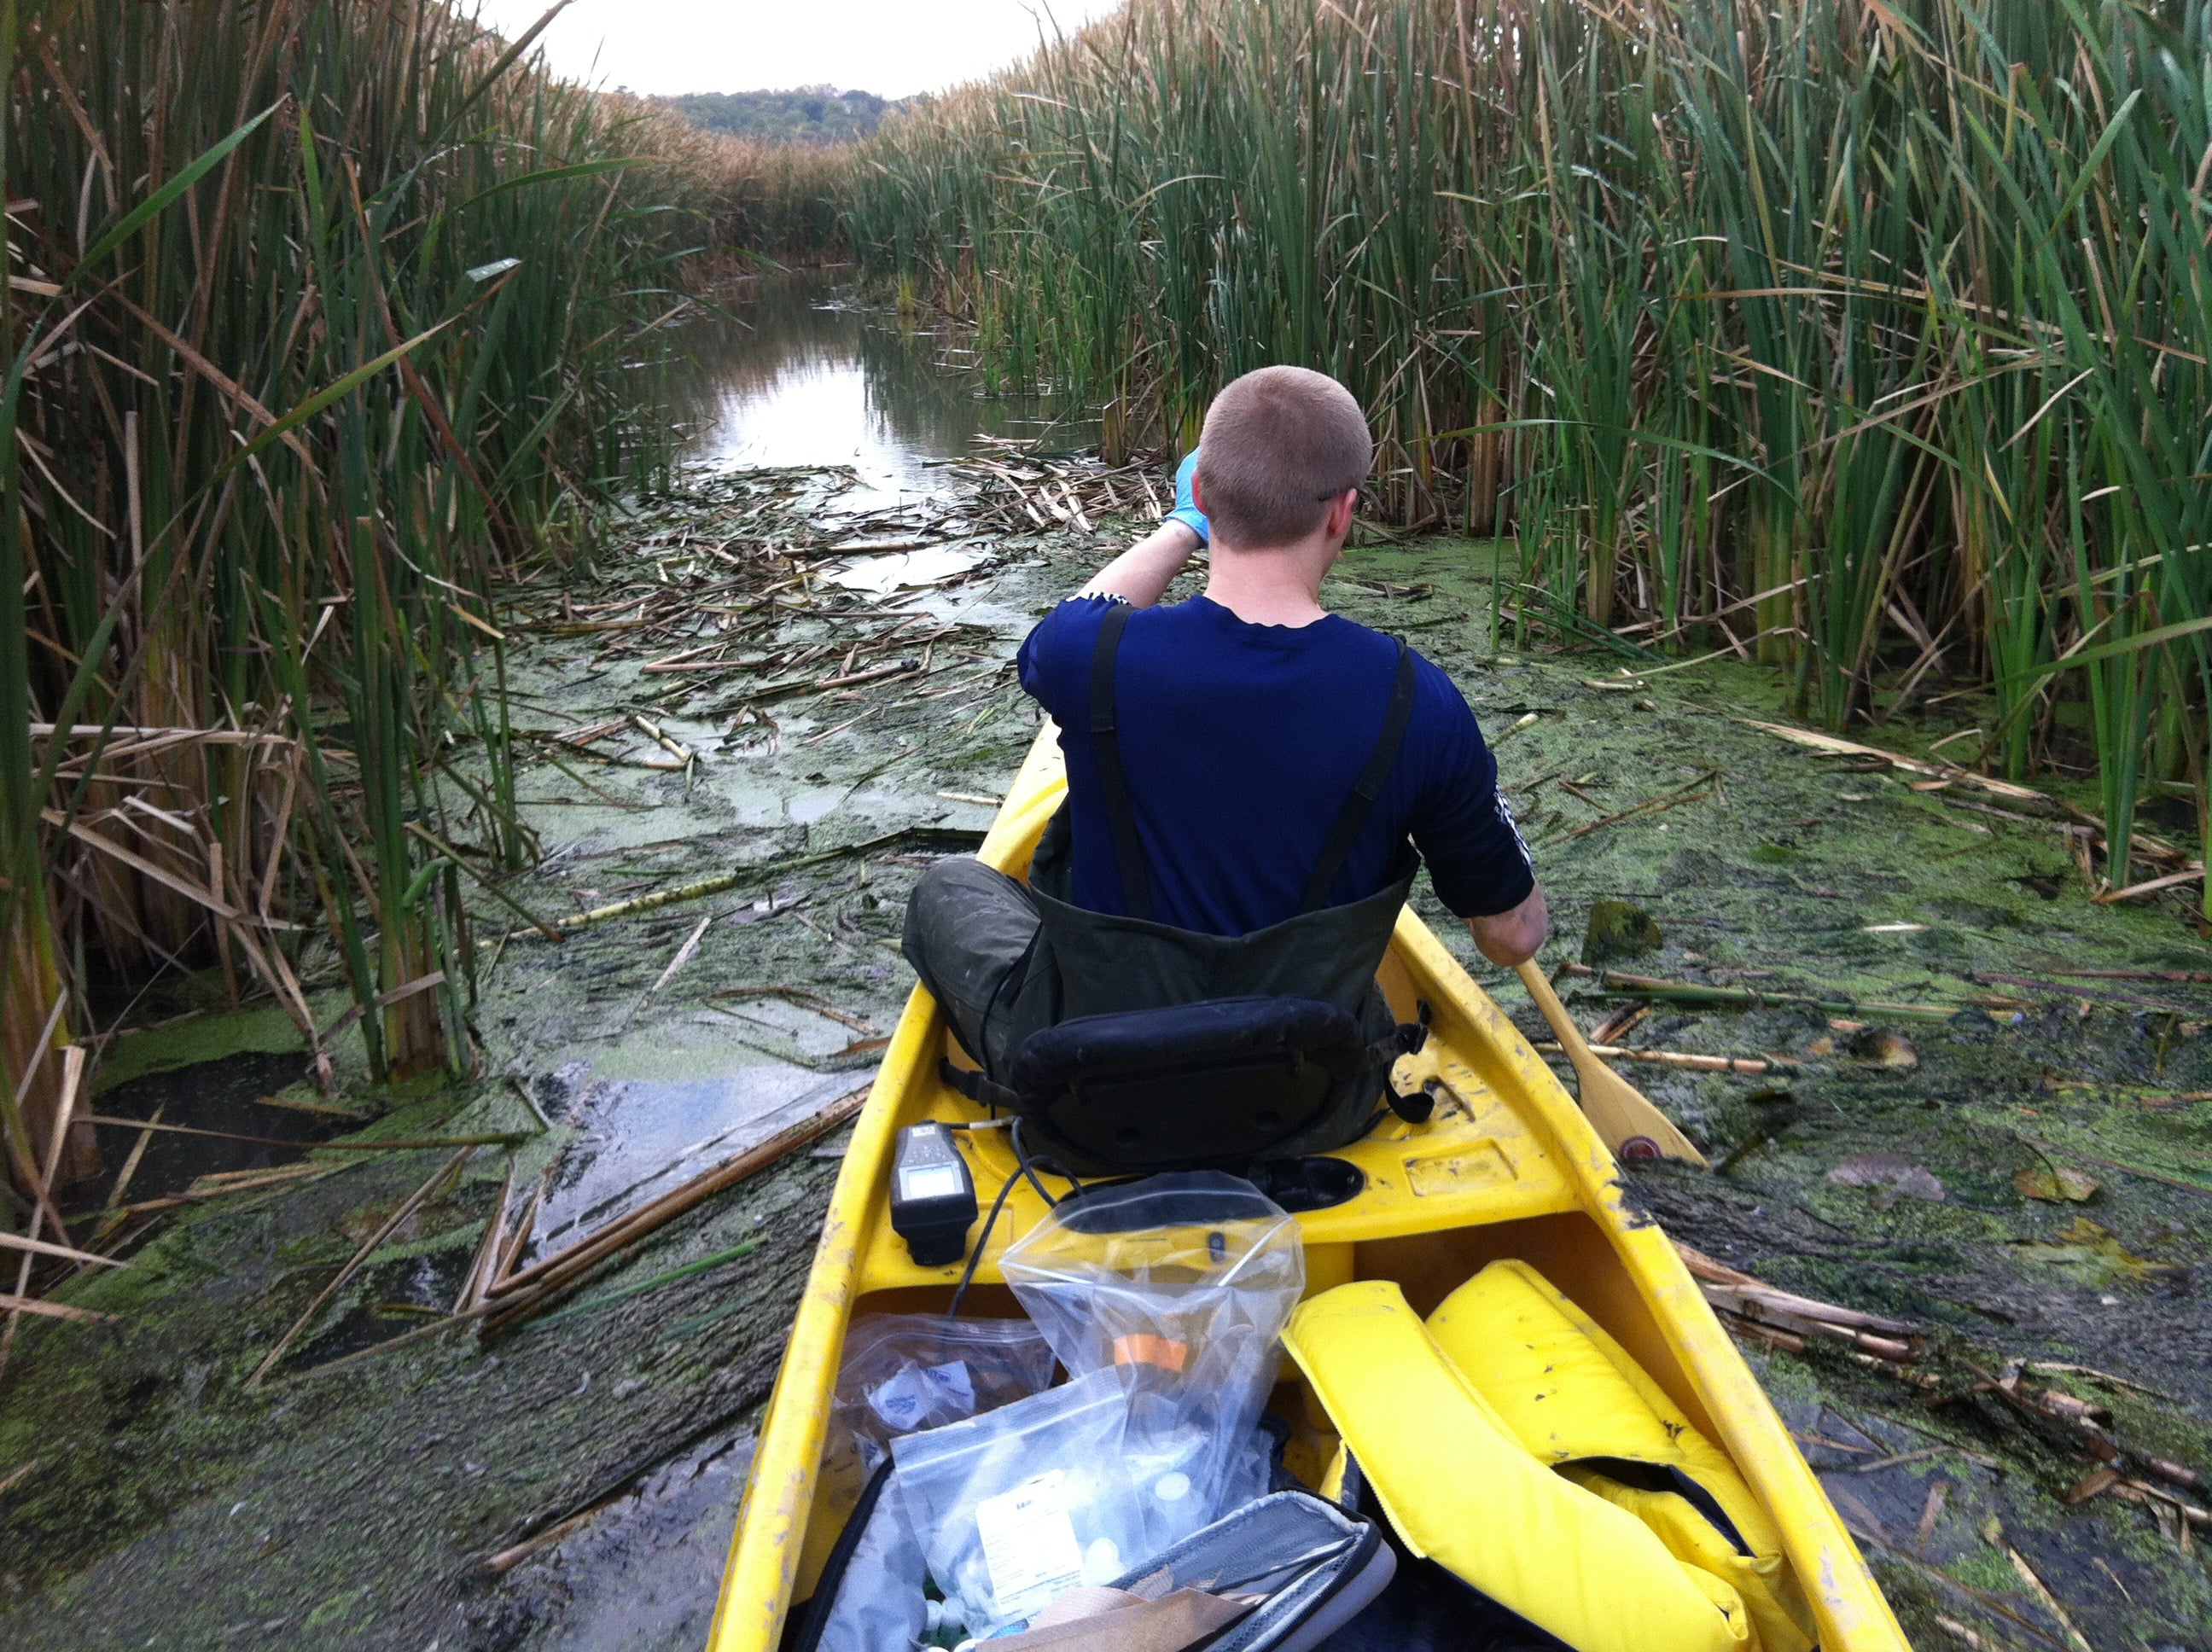 Chris Parsons on a sampling trip in Coot's Paradise near Toronto.